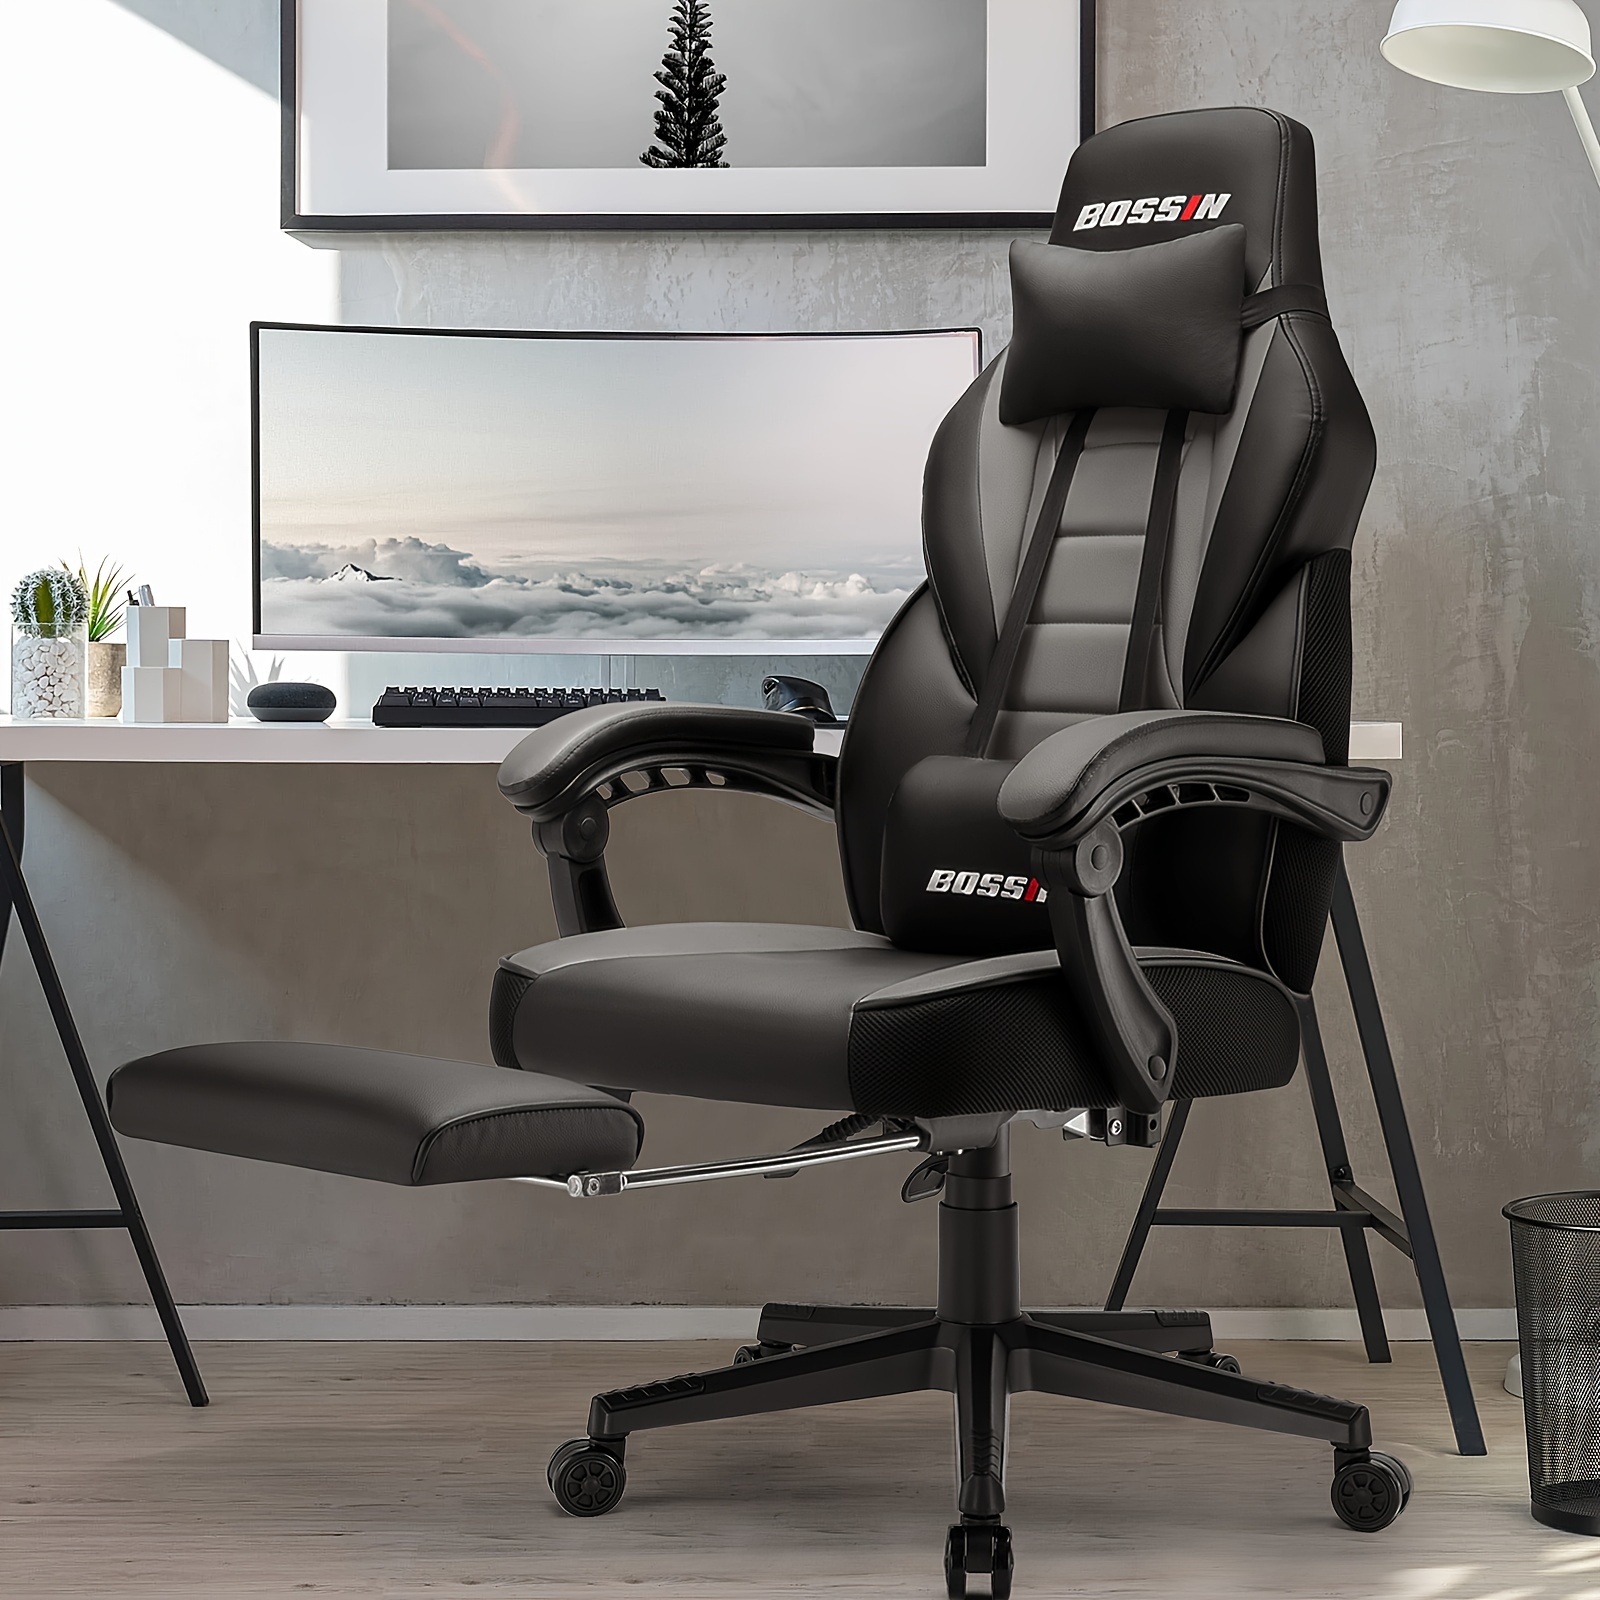 

Gaming Chair With Massage, Leather Computer Desk Chair With Footrest And Headrest, Ergonomic Heavy Duty Design, Large Size High-back E-sports, Big And Tall Gaming Chair